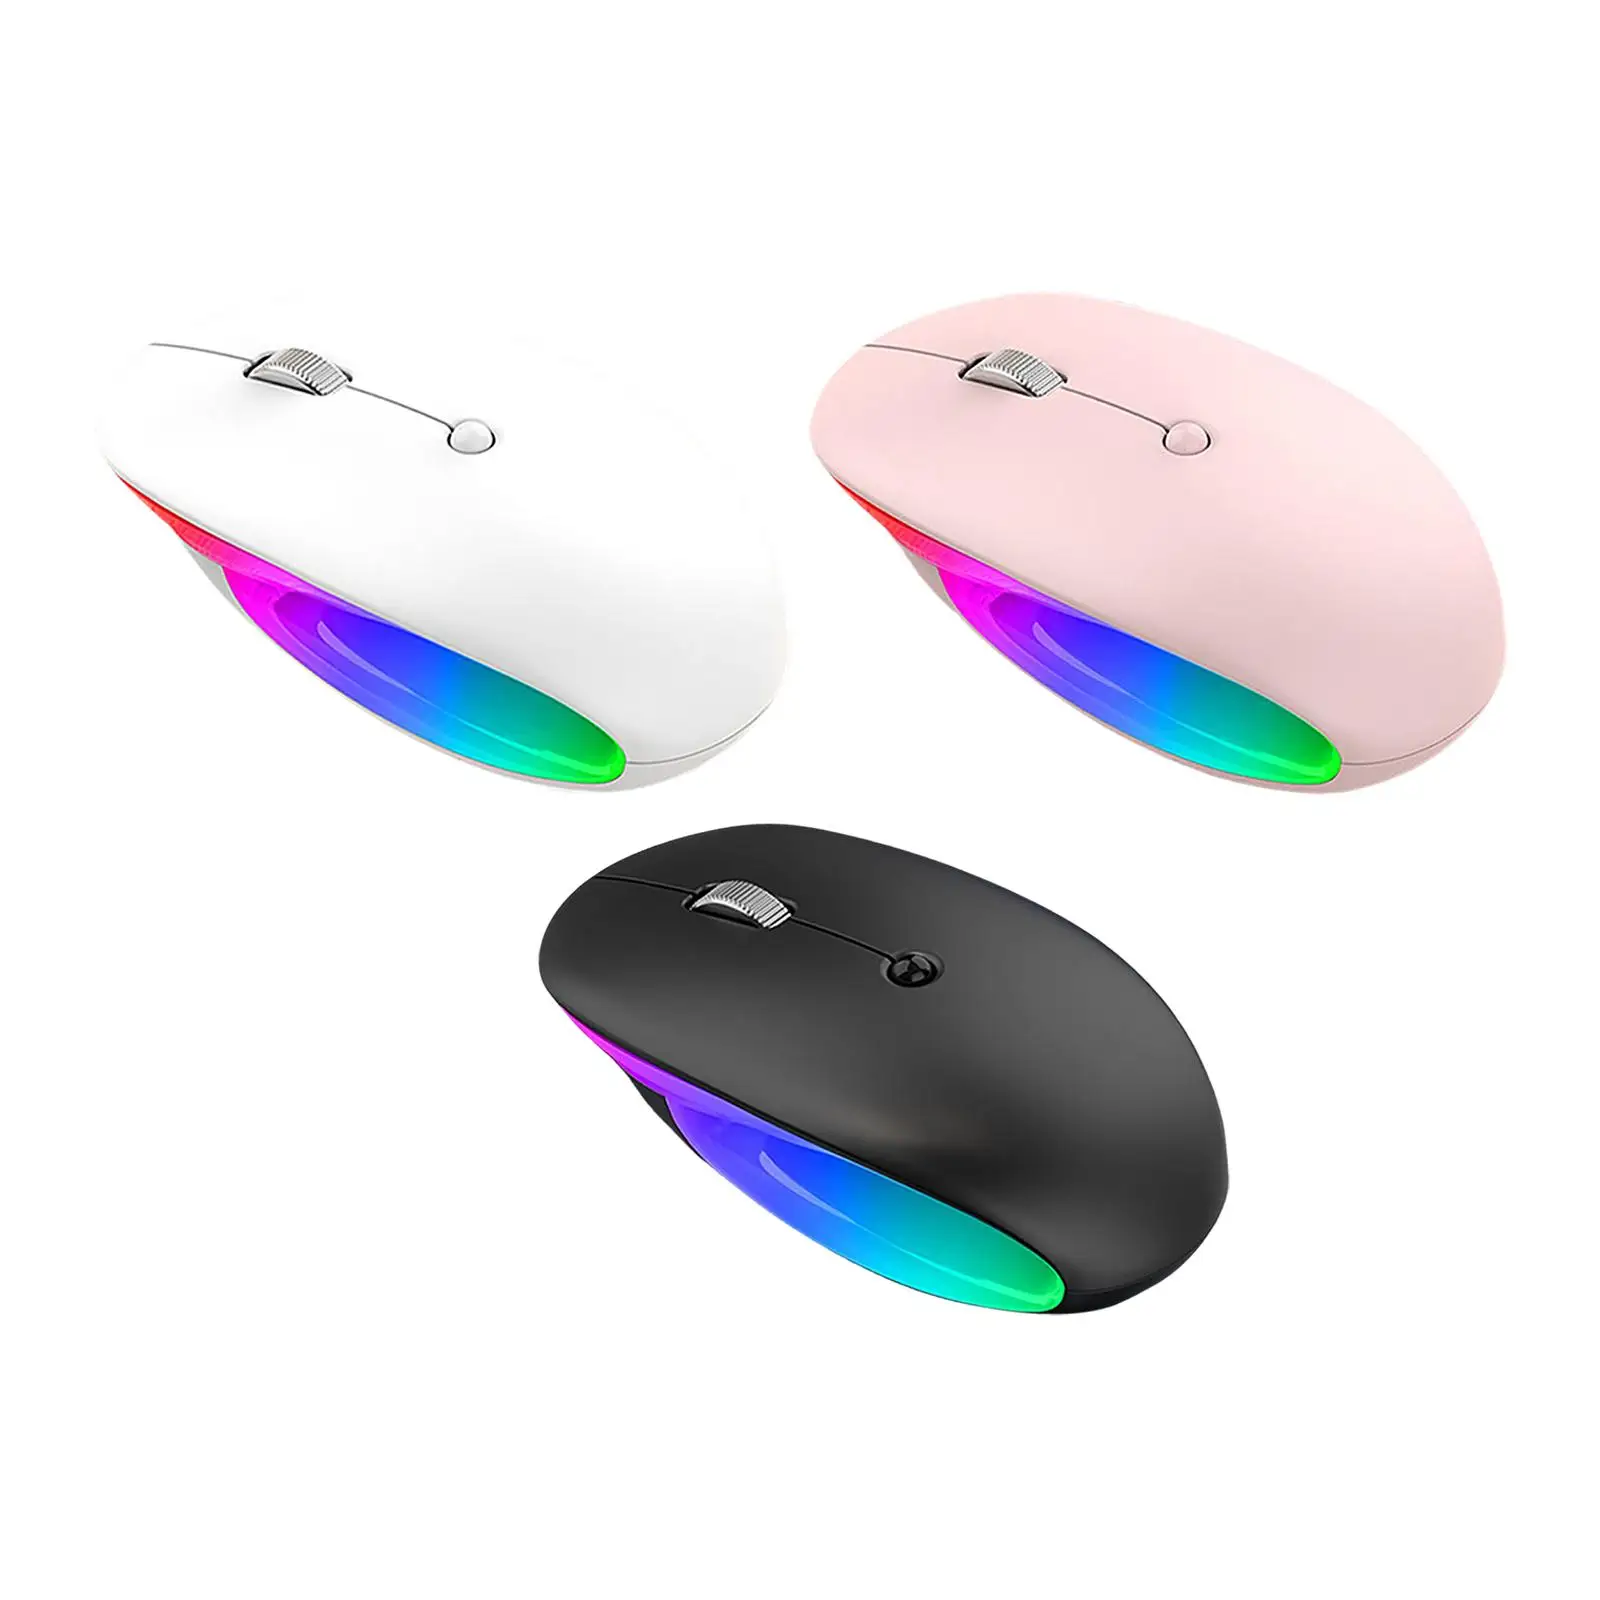 Wireless Bluetooth Mouse BT5.1 2.4GHz with USB Receiver for PC Laptop Auto Sleep